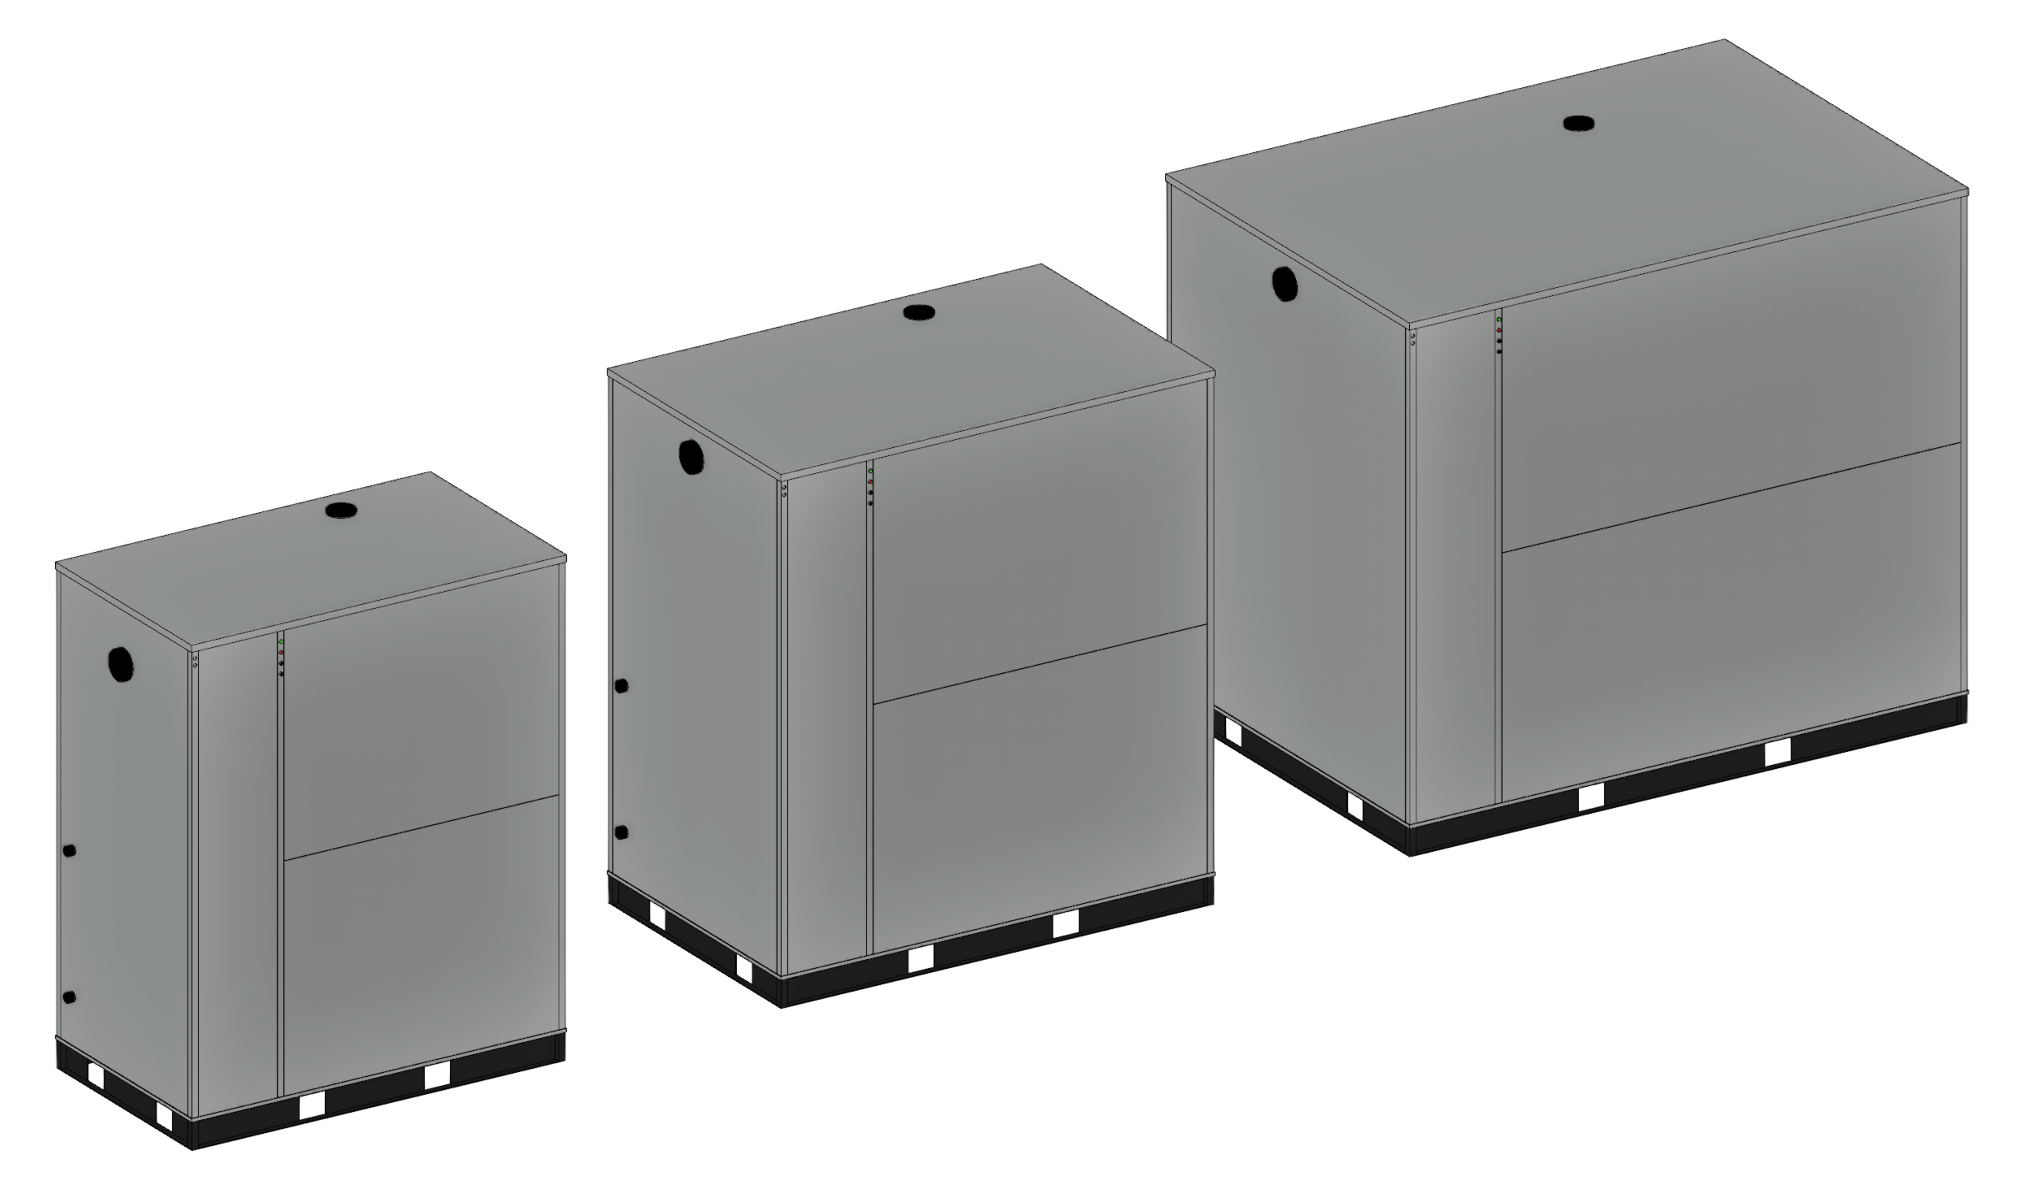 Three SHARC Energy heat pumps in different sizes which have varying chassis and heating capacities.